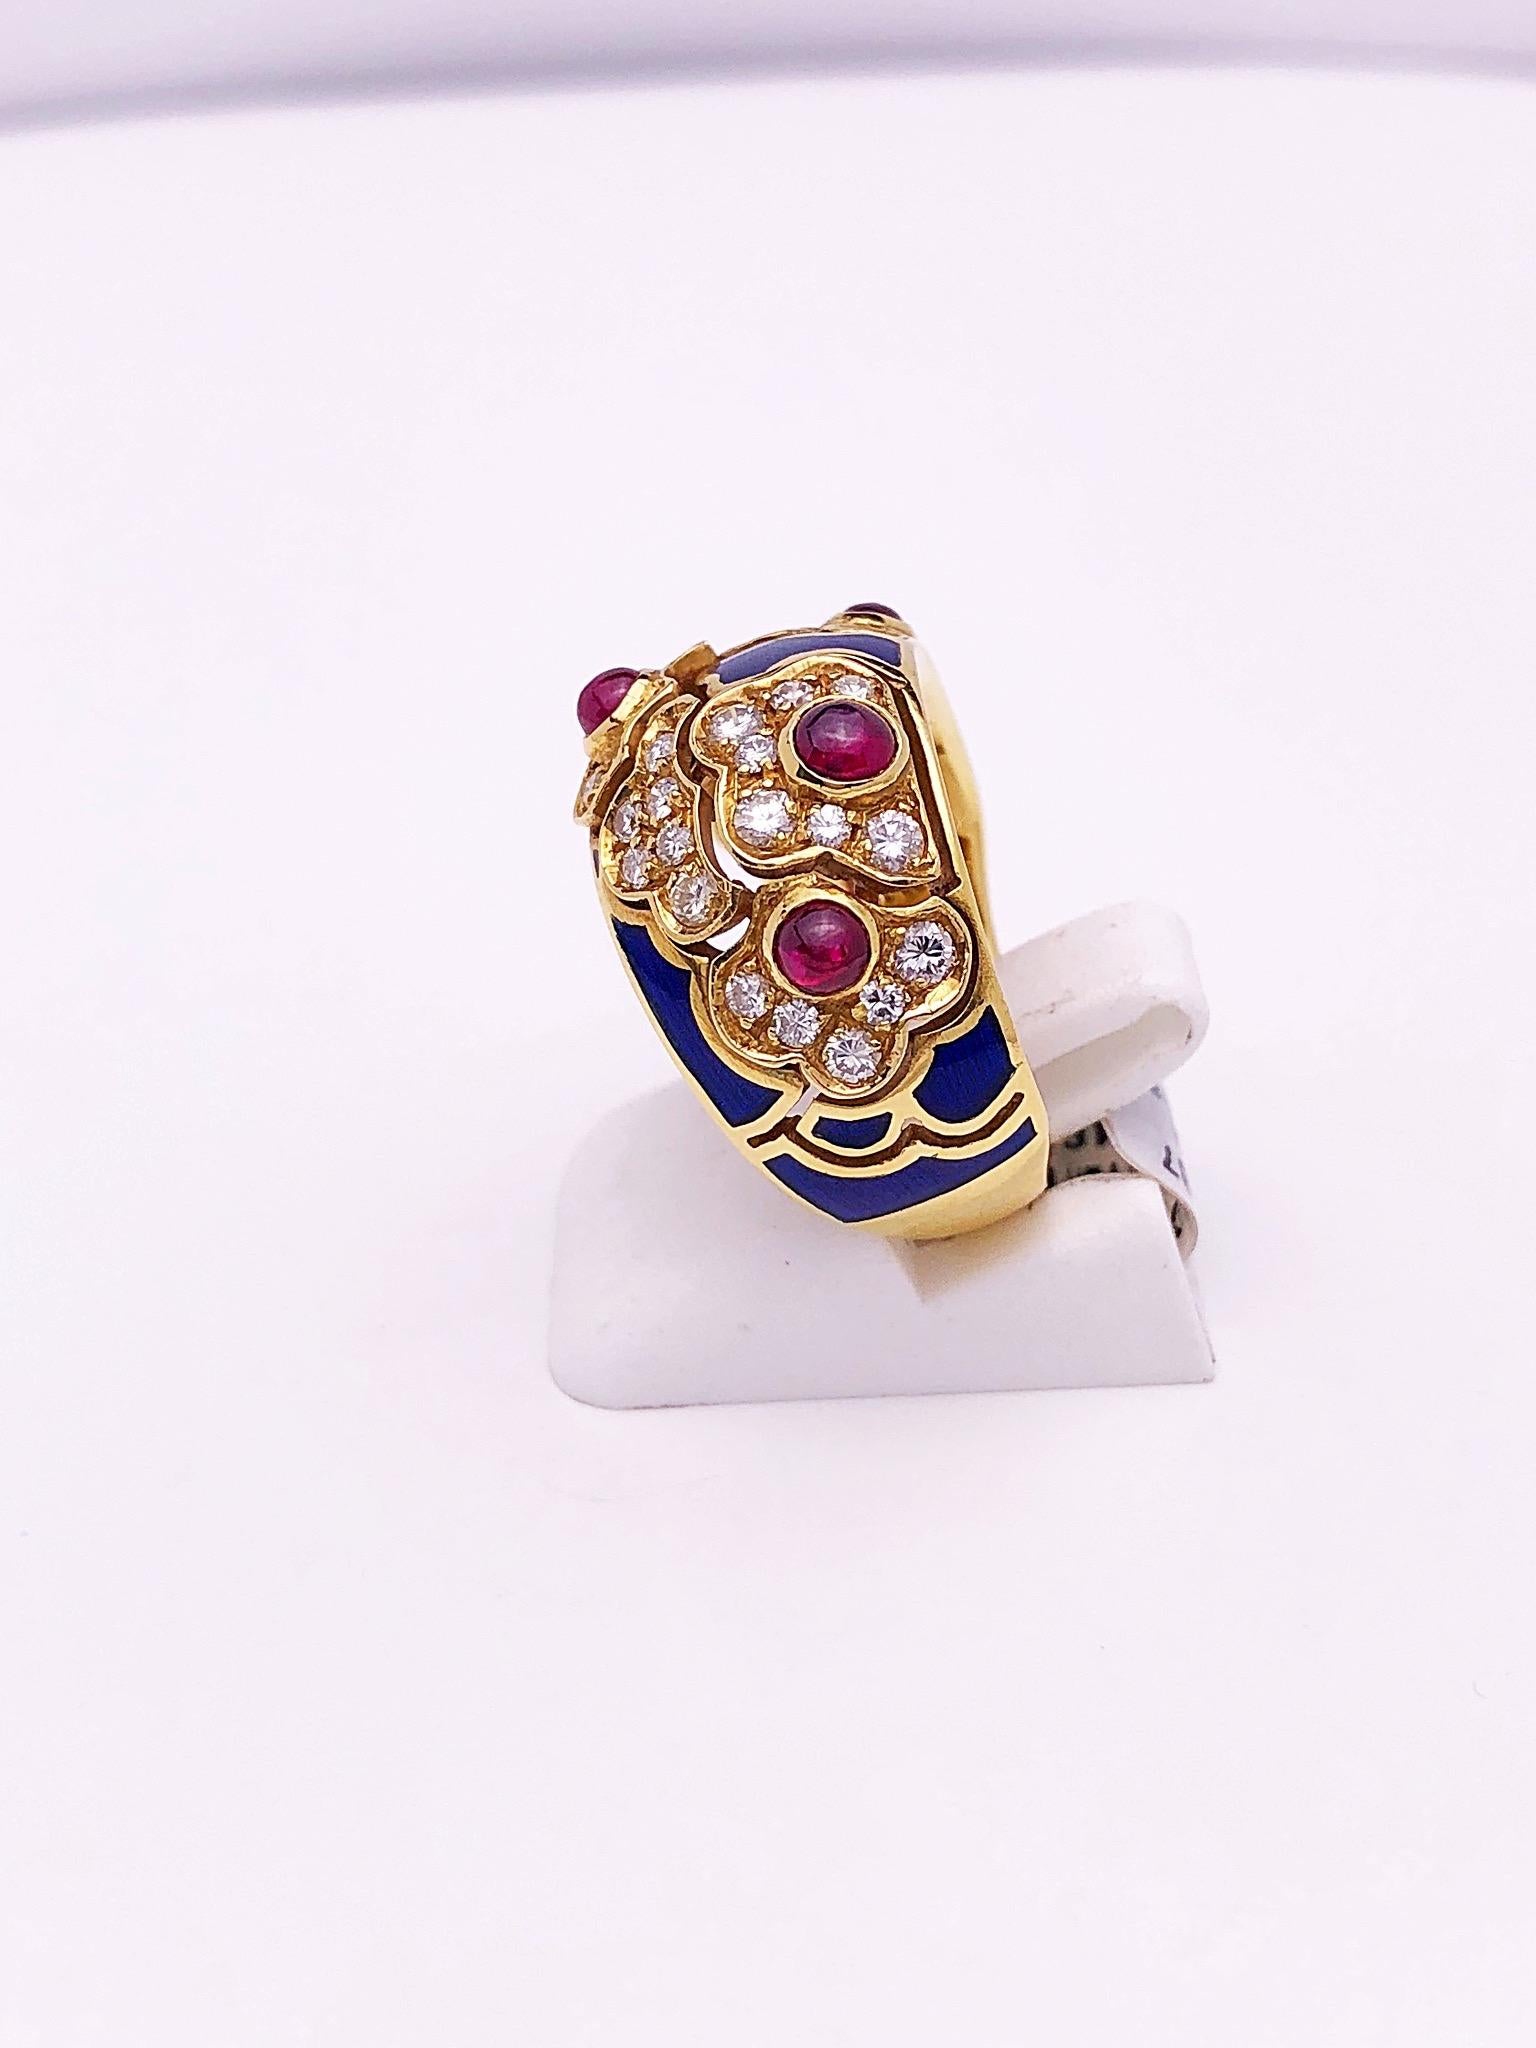 Contemporary 18 Karat Yellow Gold Ring with Rubies, Diamonds and Enamel